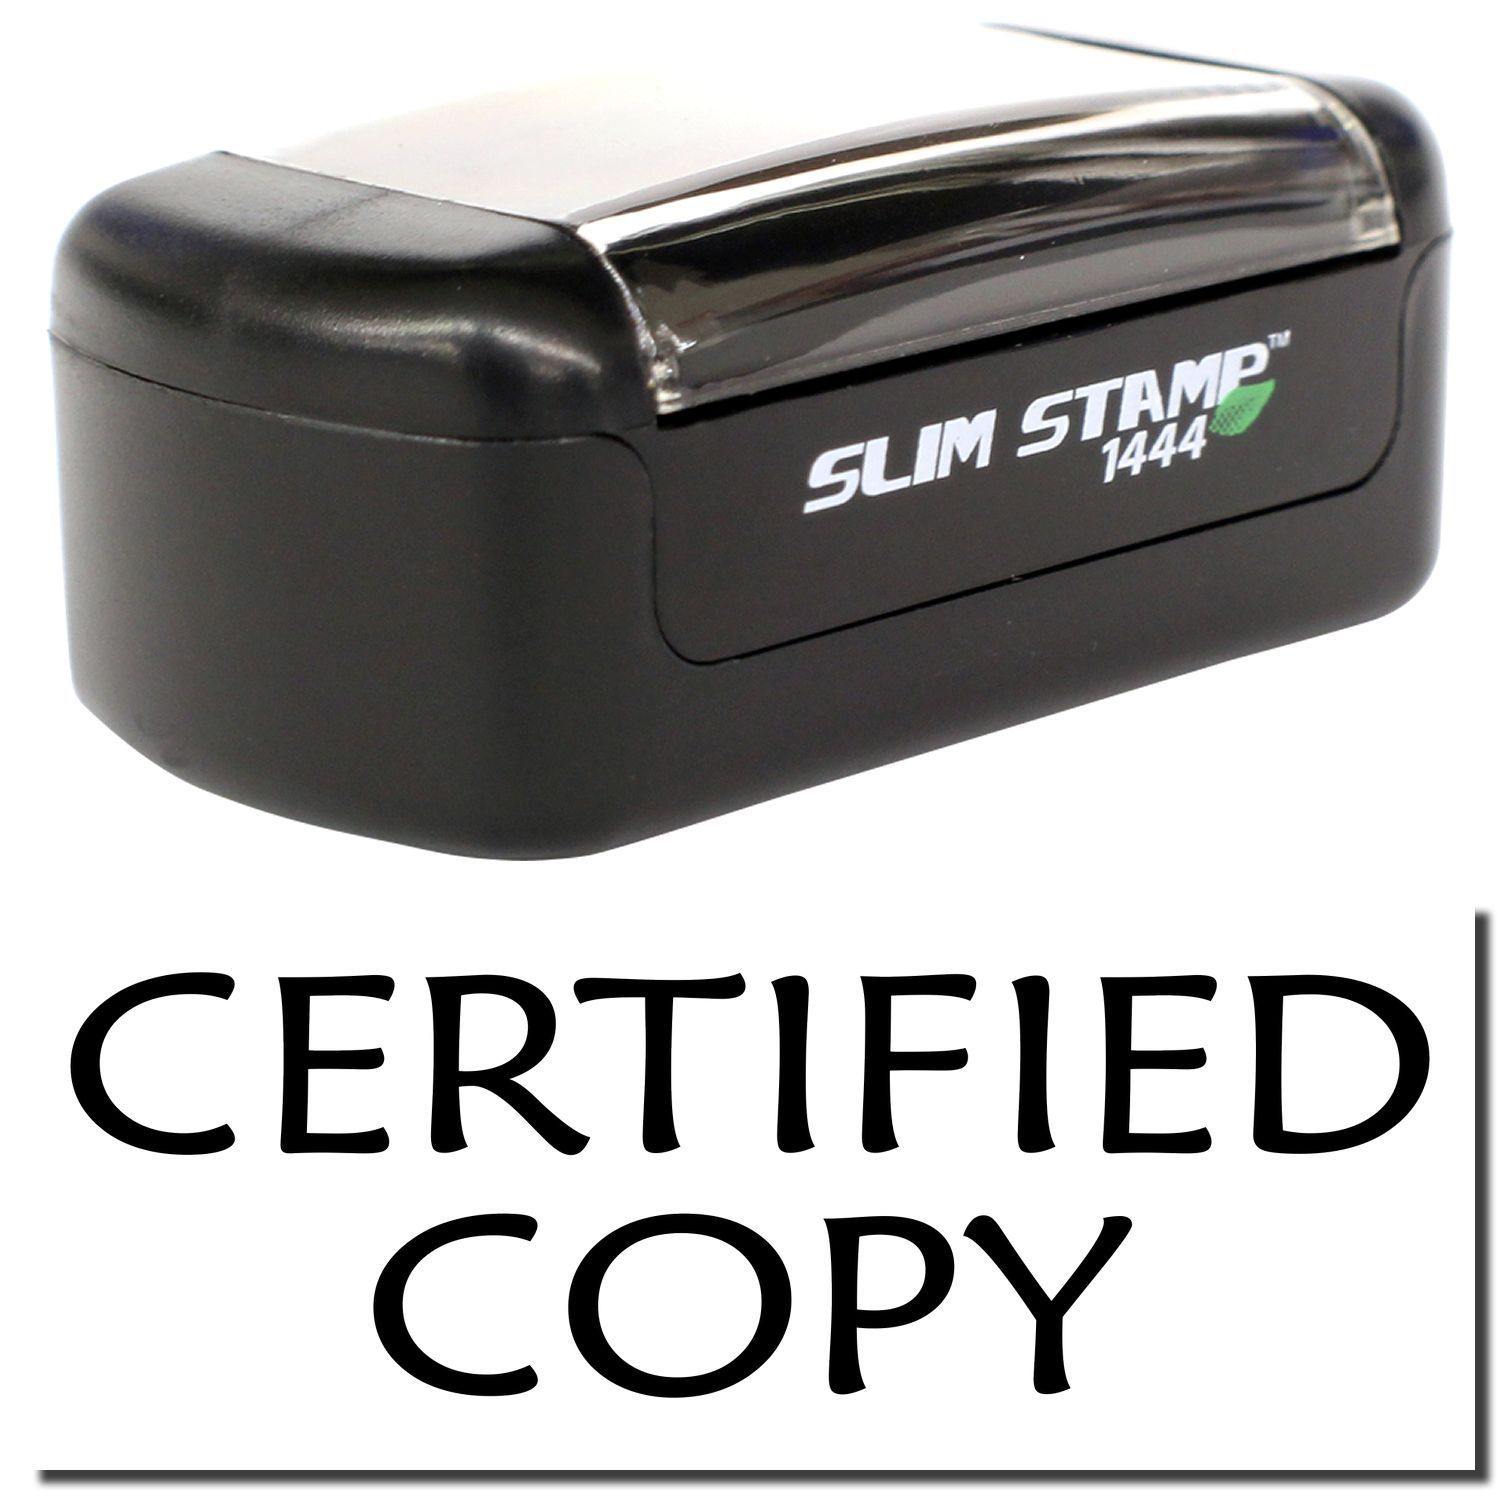 A stock office pre-inked stamp with a stamped image showing how the text "CERTIFIED COPY" is displayed after stamping.